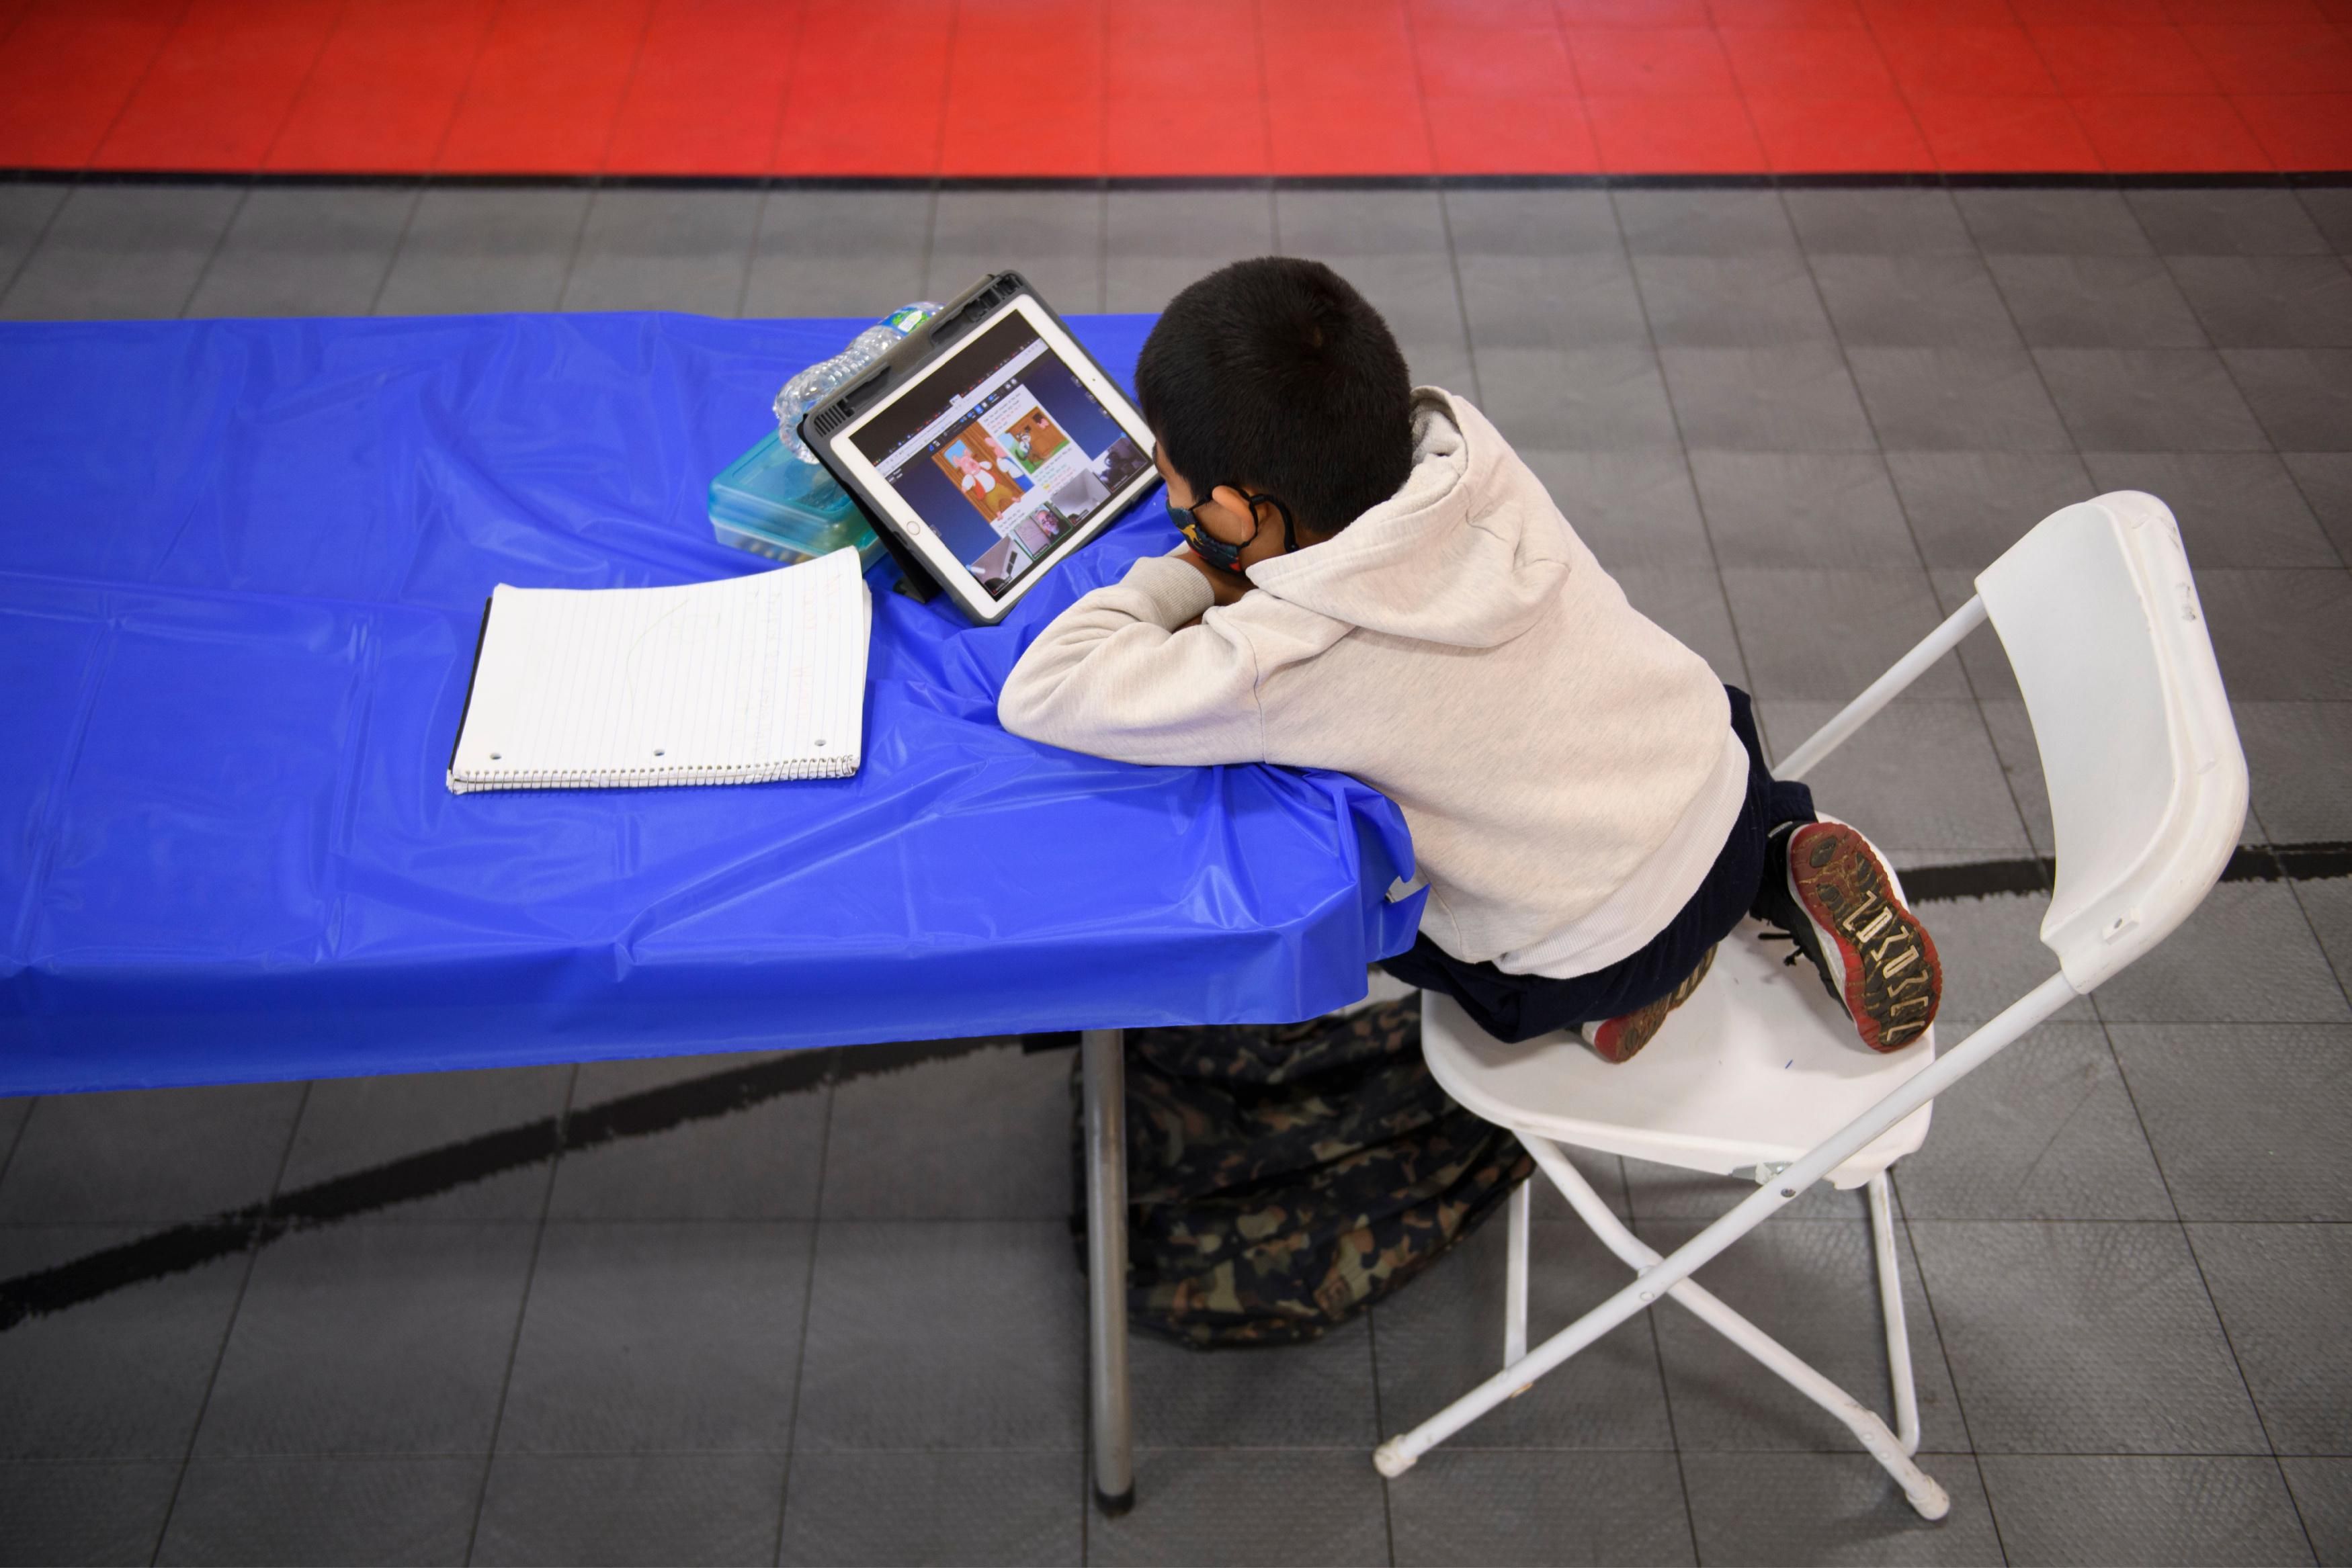 A child attends an online class at a learning hub inside the Crenshaw Family YMCA during the Covid-19 pandemic on February 17, 2021 in Los Angeles. (Photo: Patrick T. Fallon/AFP via Getty Images)